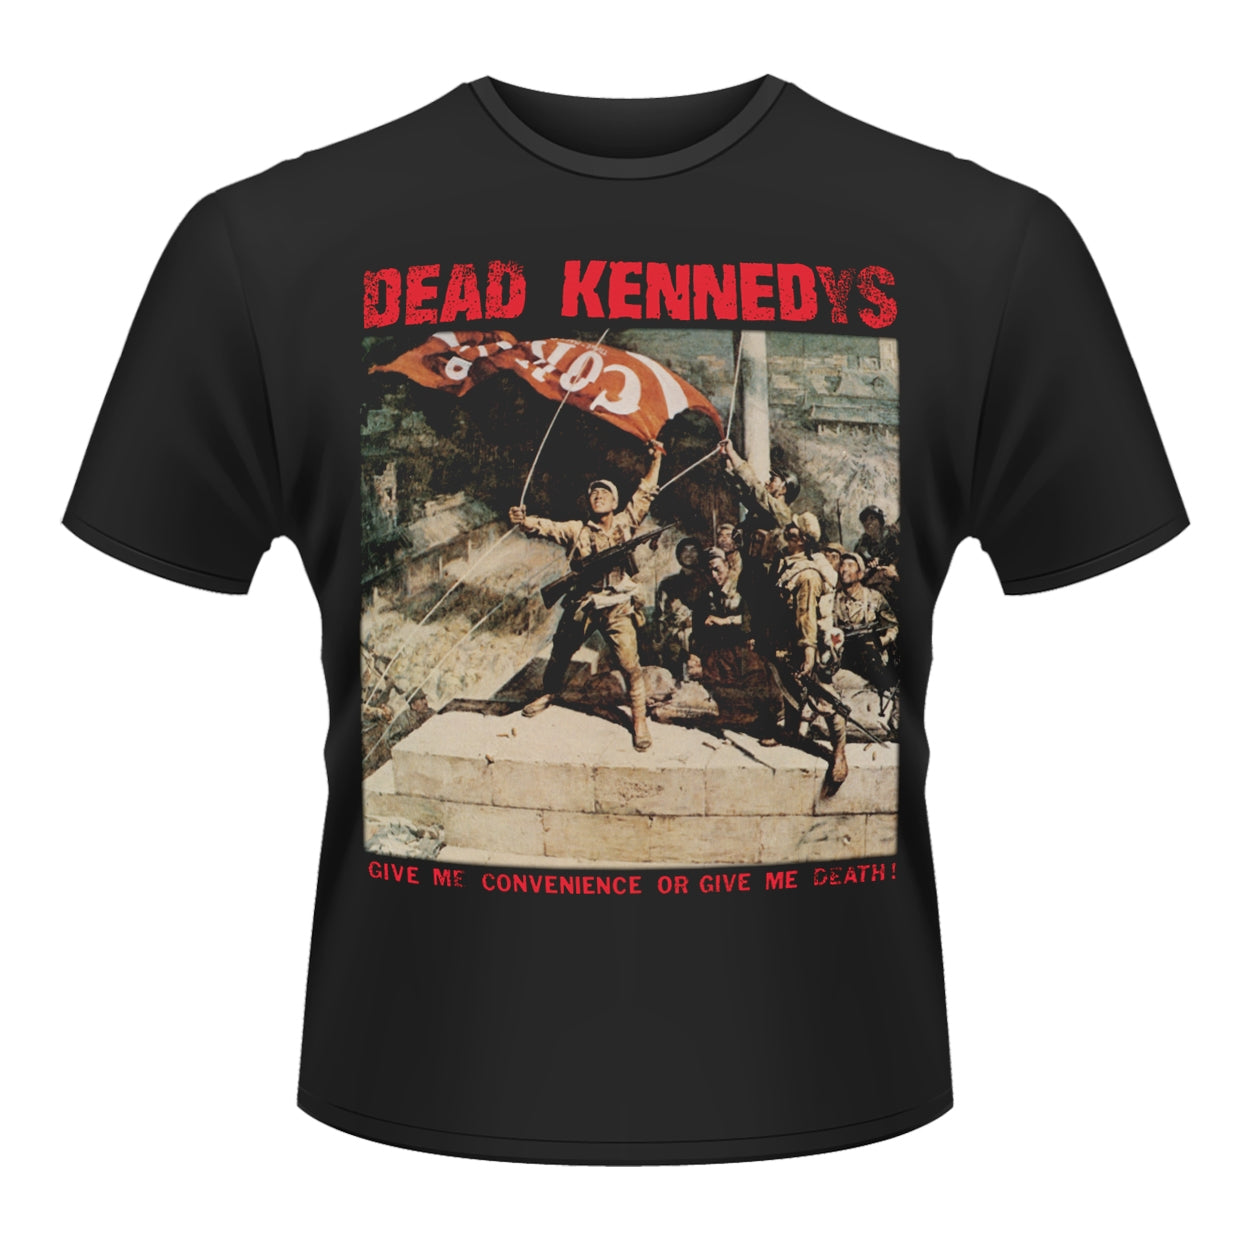 Dead Kennedys "Give Me Convenience Or Give Me Death" T shirt